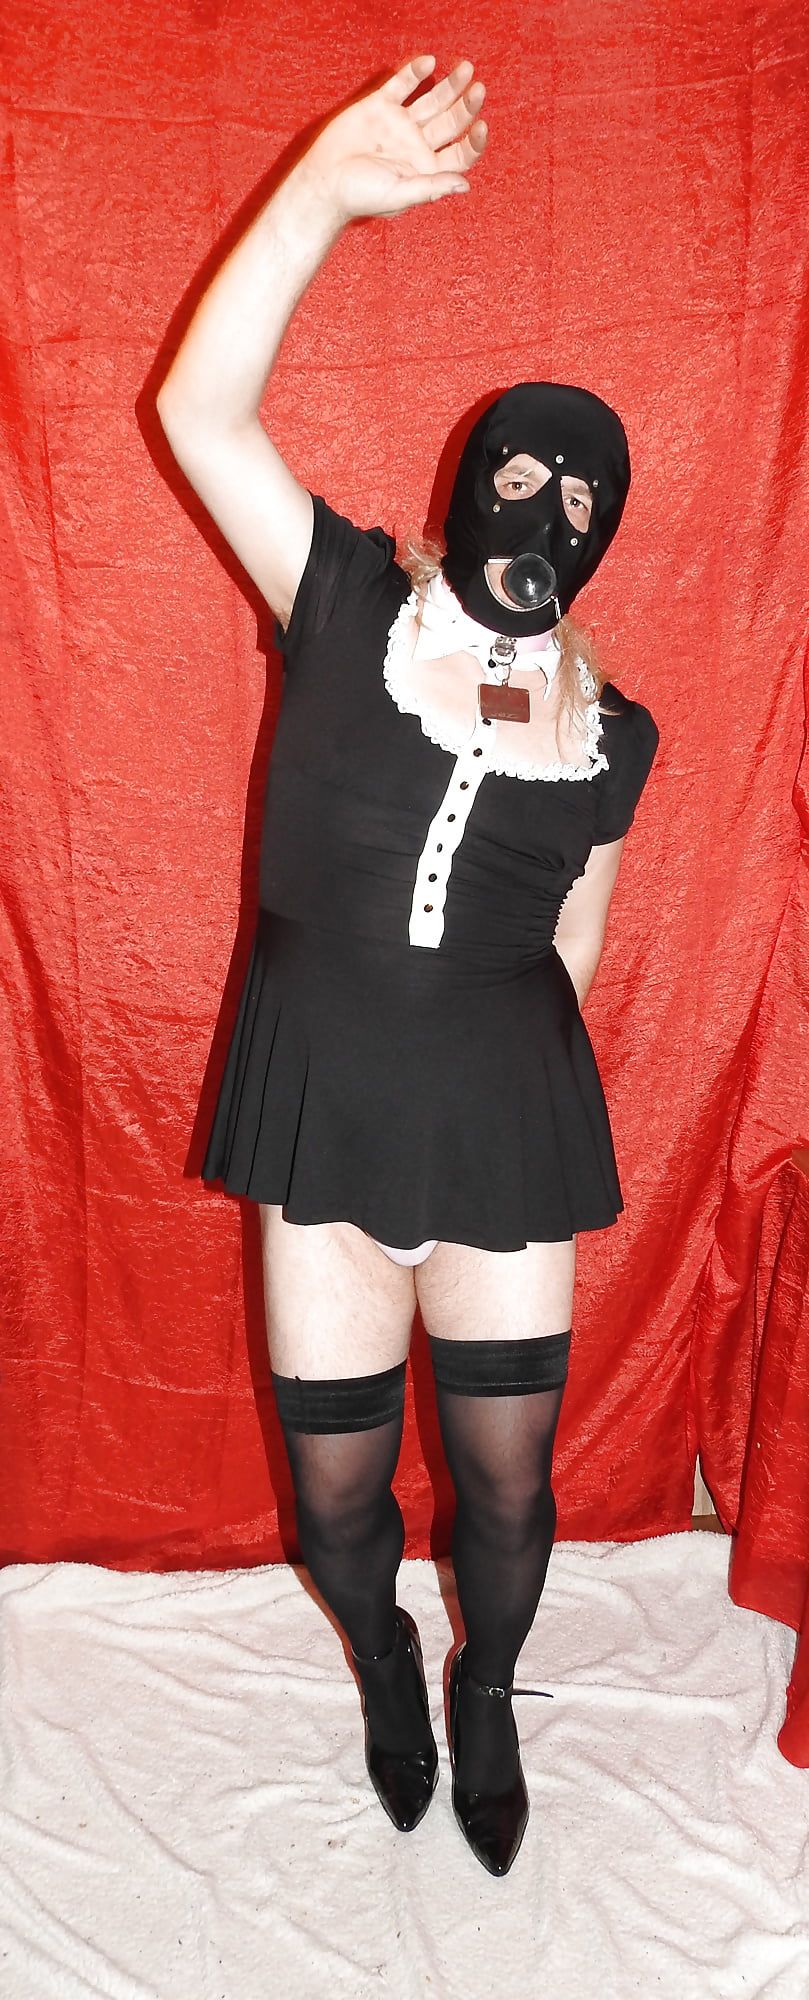 Task13 - Sissy Dance with Dildio in Mouth #3